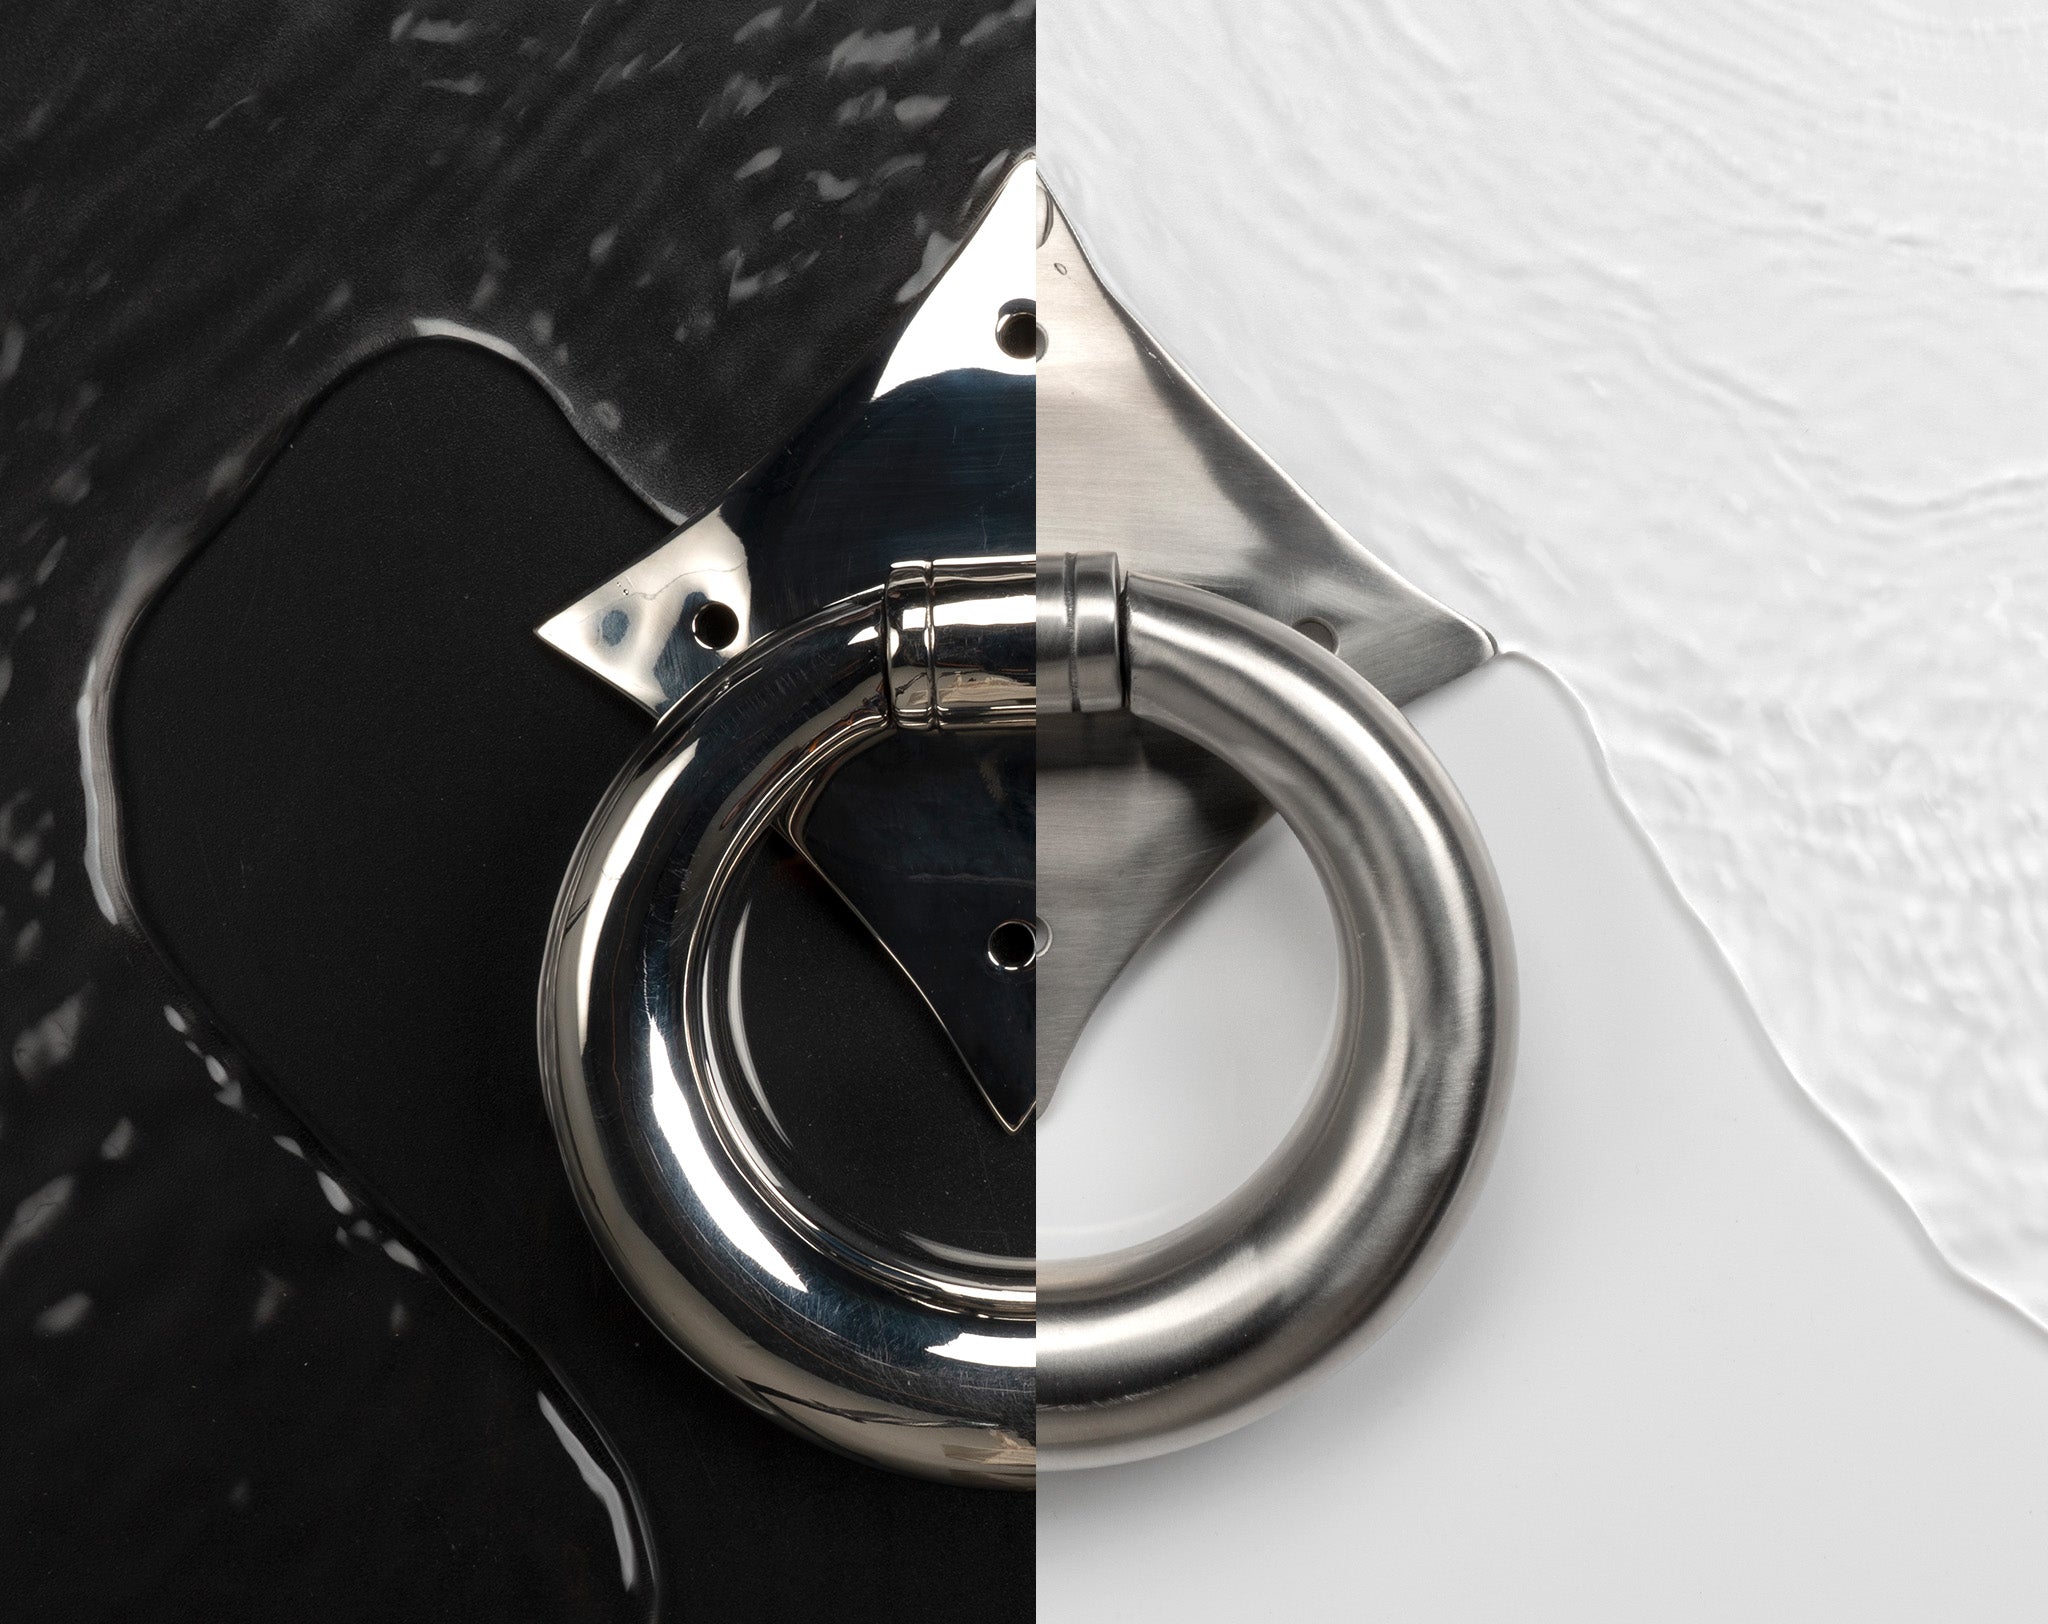 Comparison image of a Polished vs. Satin Marine Stainless Steel Ring door knocker on a white and black background.